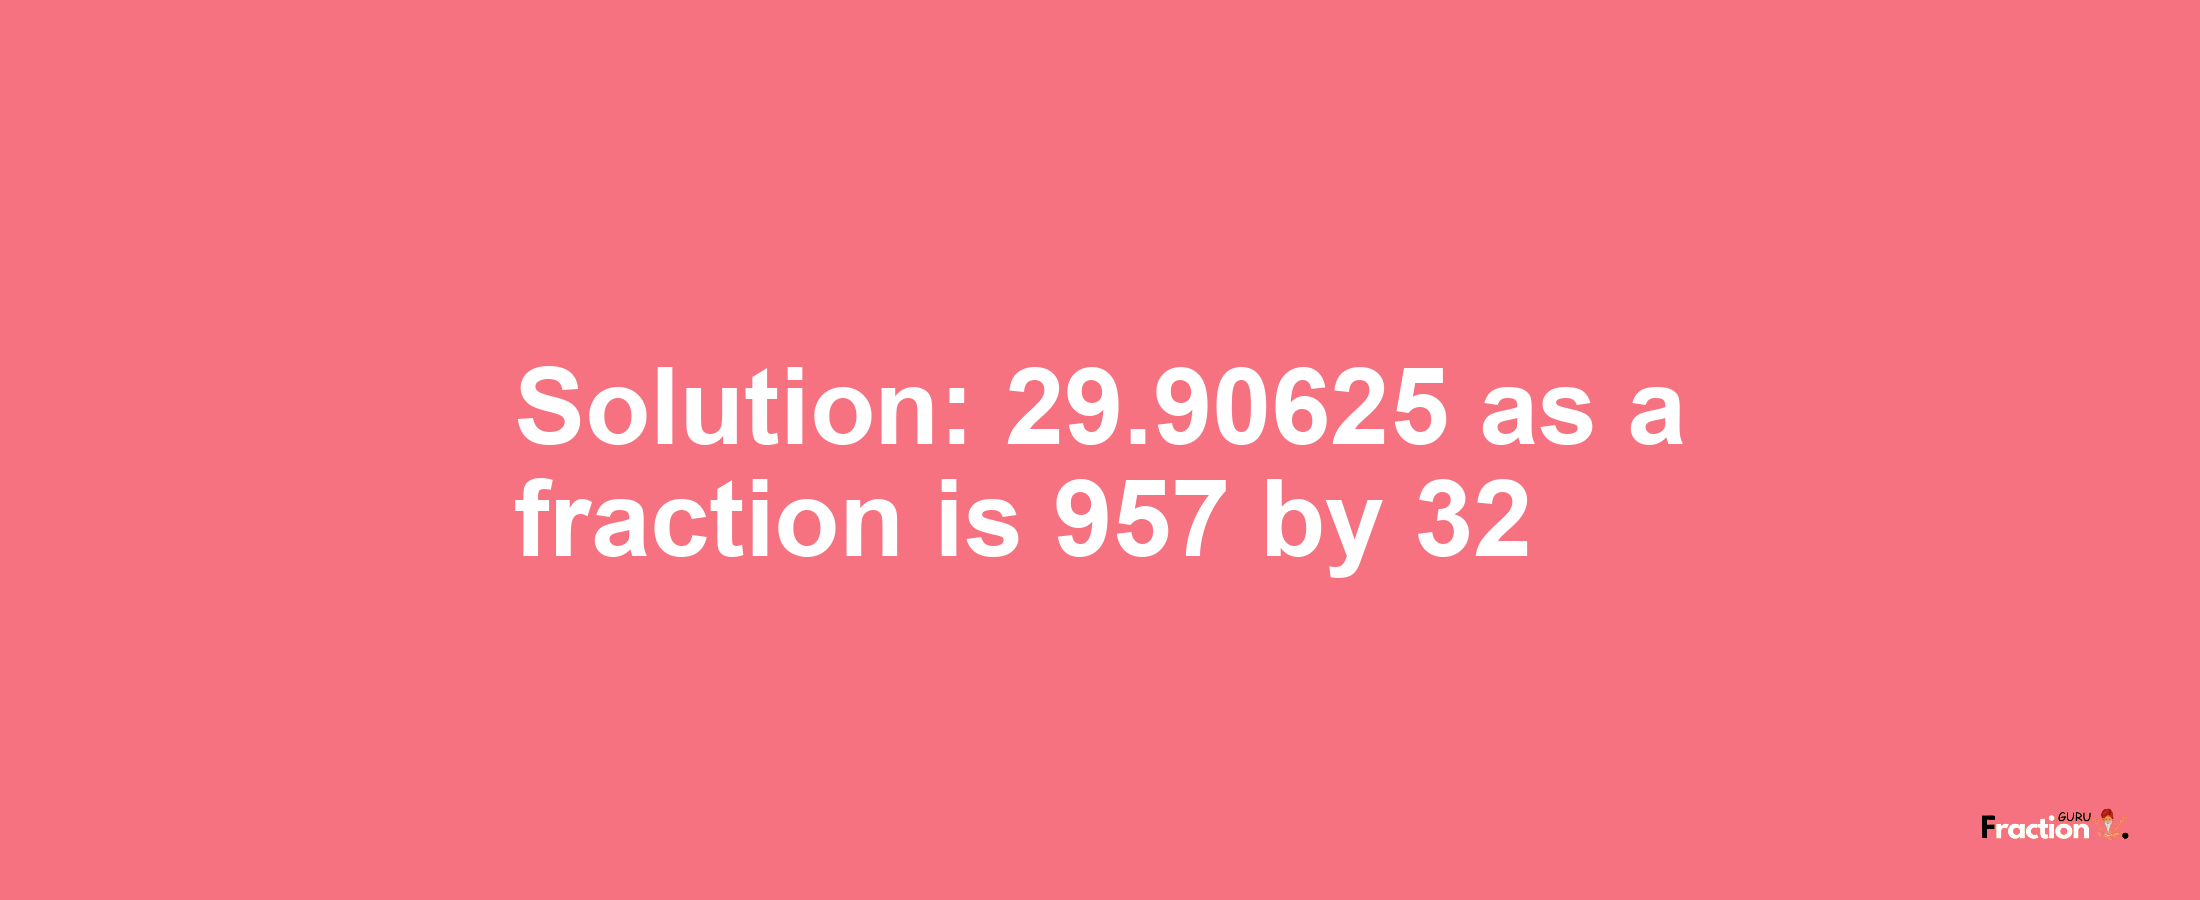 Solution:29.90625 as a fraction is 957/32